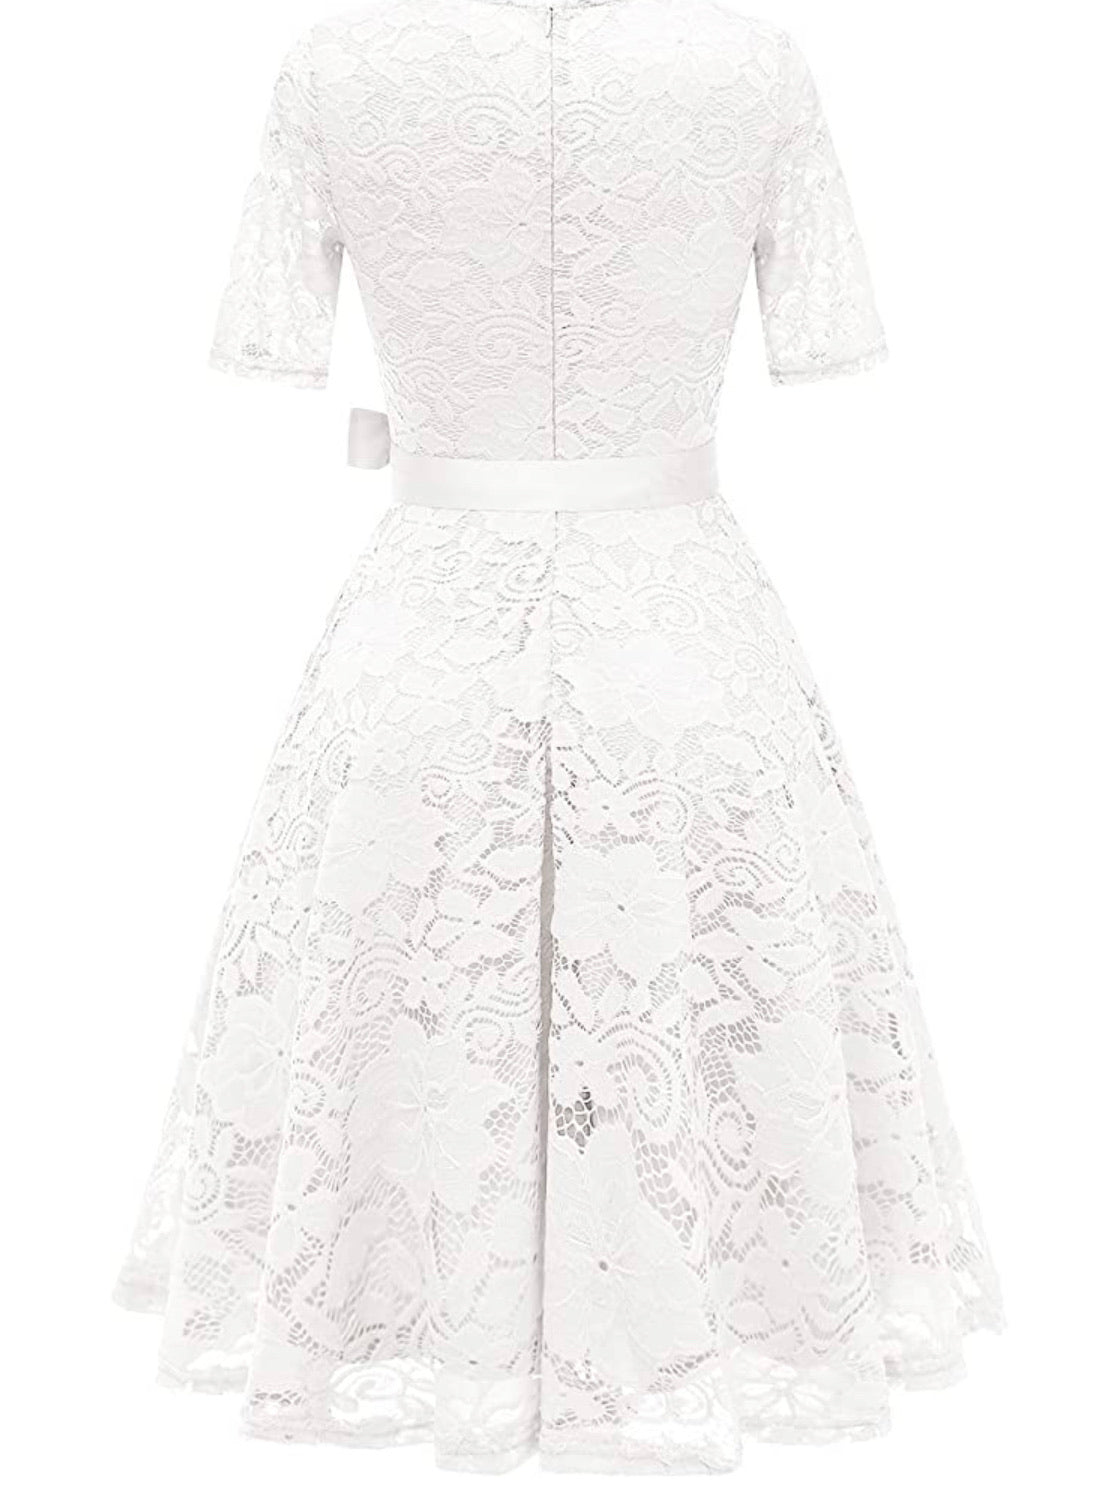 Vintage Inspired Full Lace Cocktail Dress, Sizes Small - 3XLarge (White)